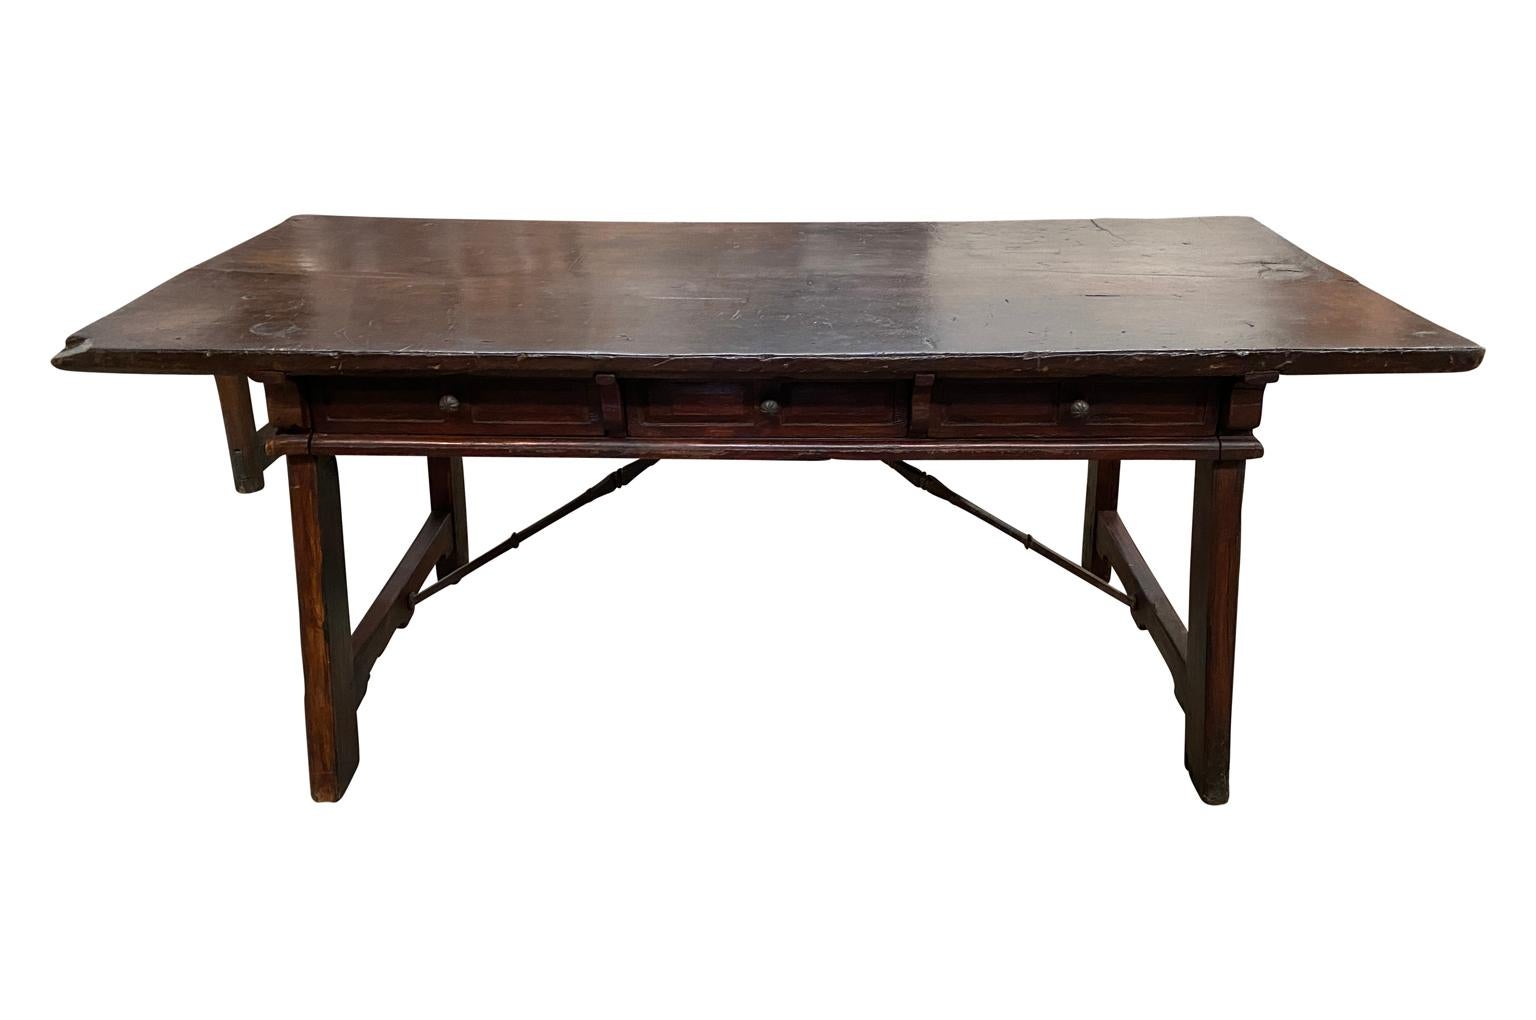 A stunning 17th century desk from Northern Spain. Beautifully constructed from chestnut and pine woods with three drawers and hand forged iron stretchers. Gorgeous patina - rich and luminous.